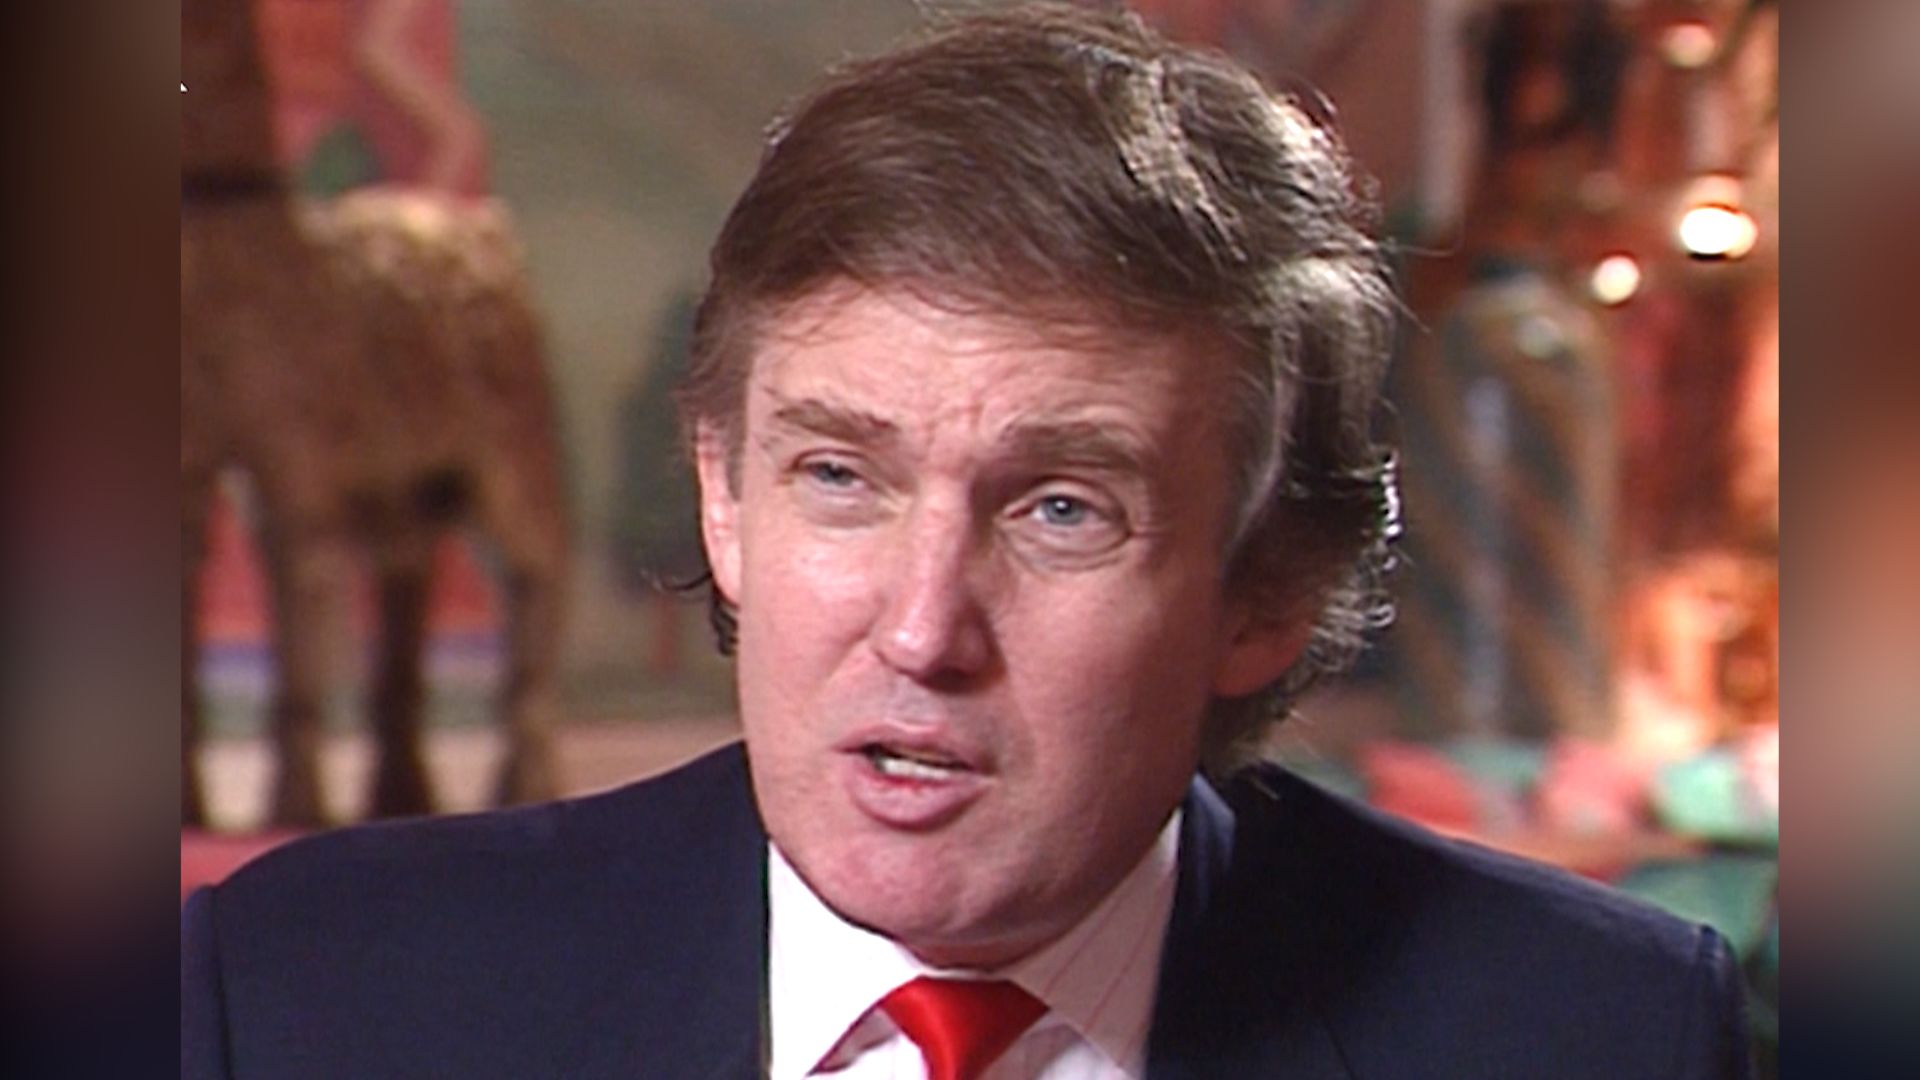 Trump walked off interview in 1990 when asked tough questions ...